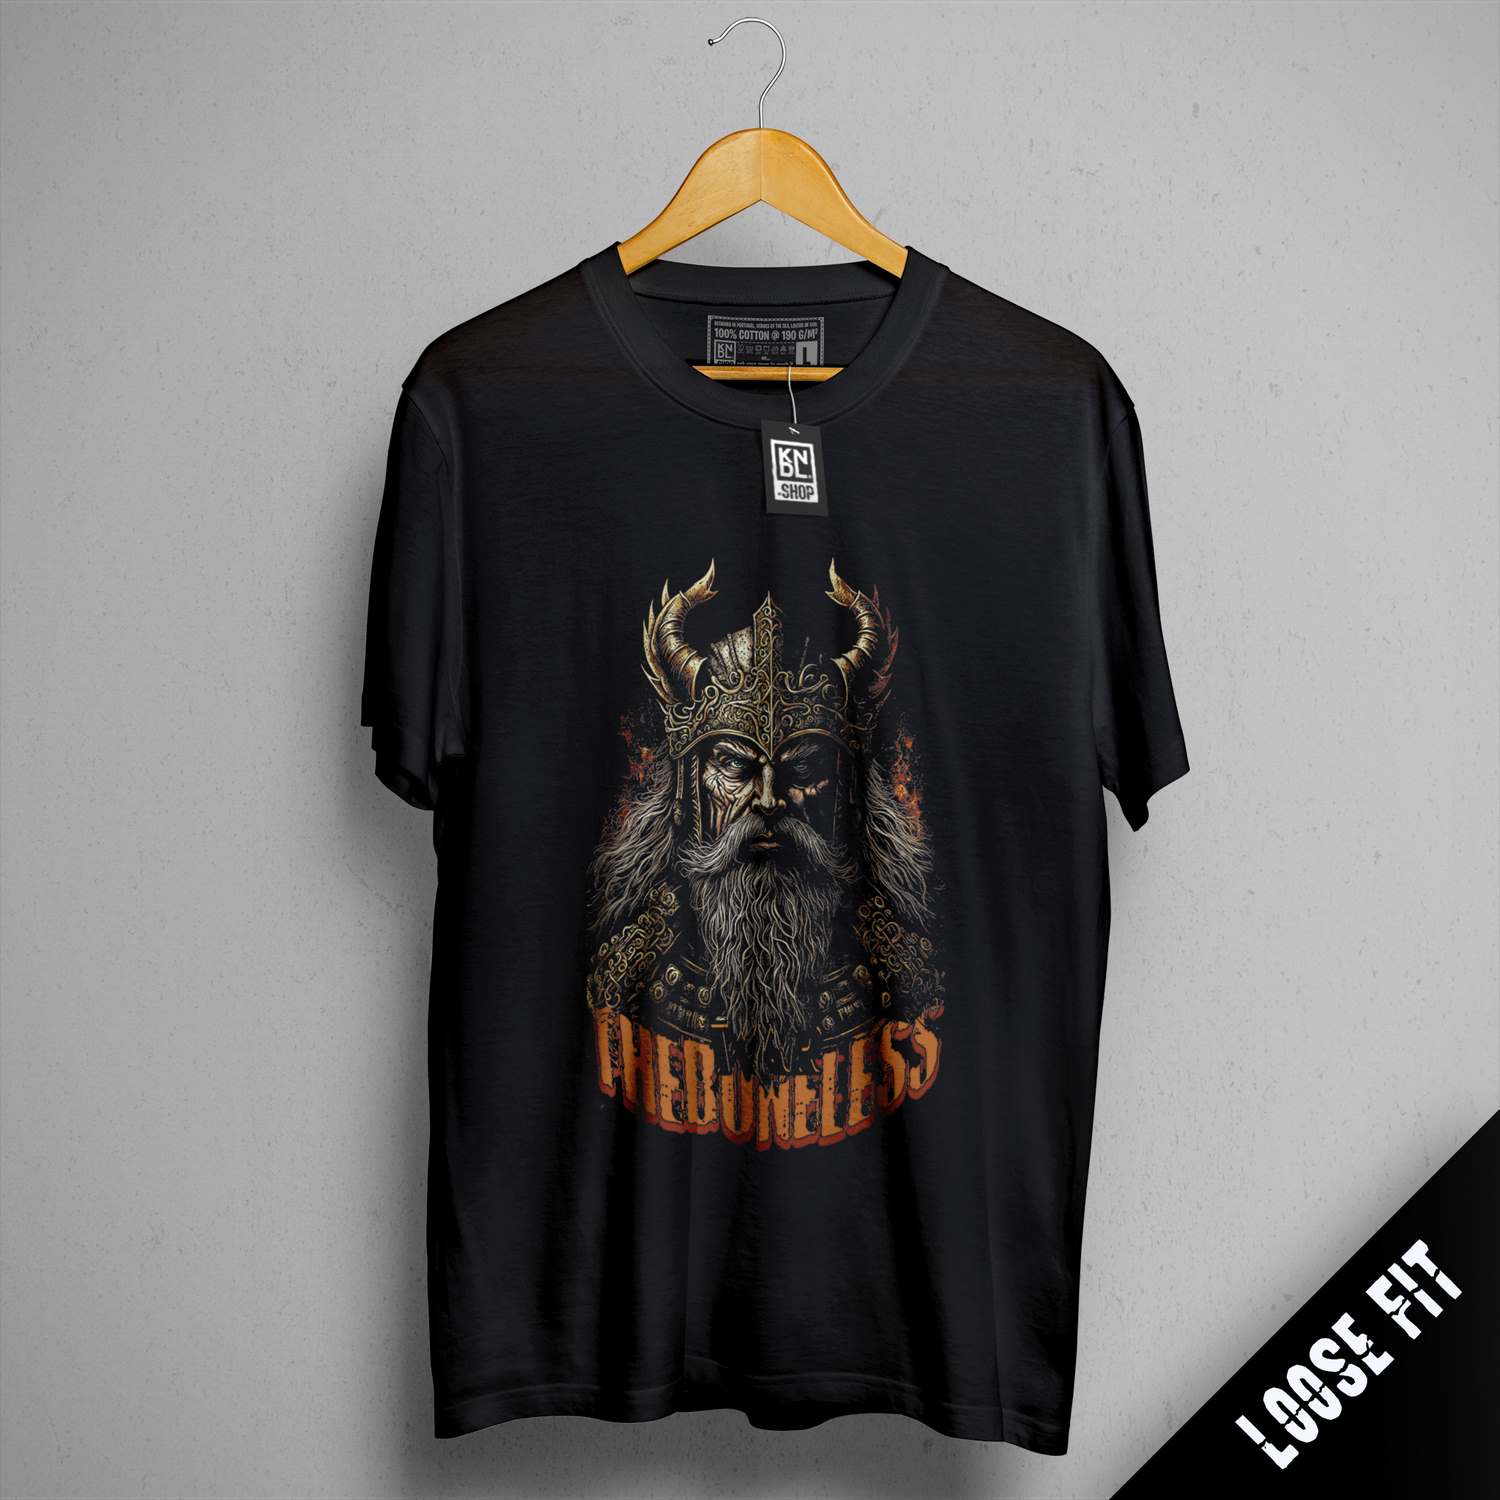 a black t - shirt with an image of a horned man